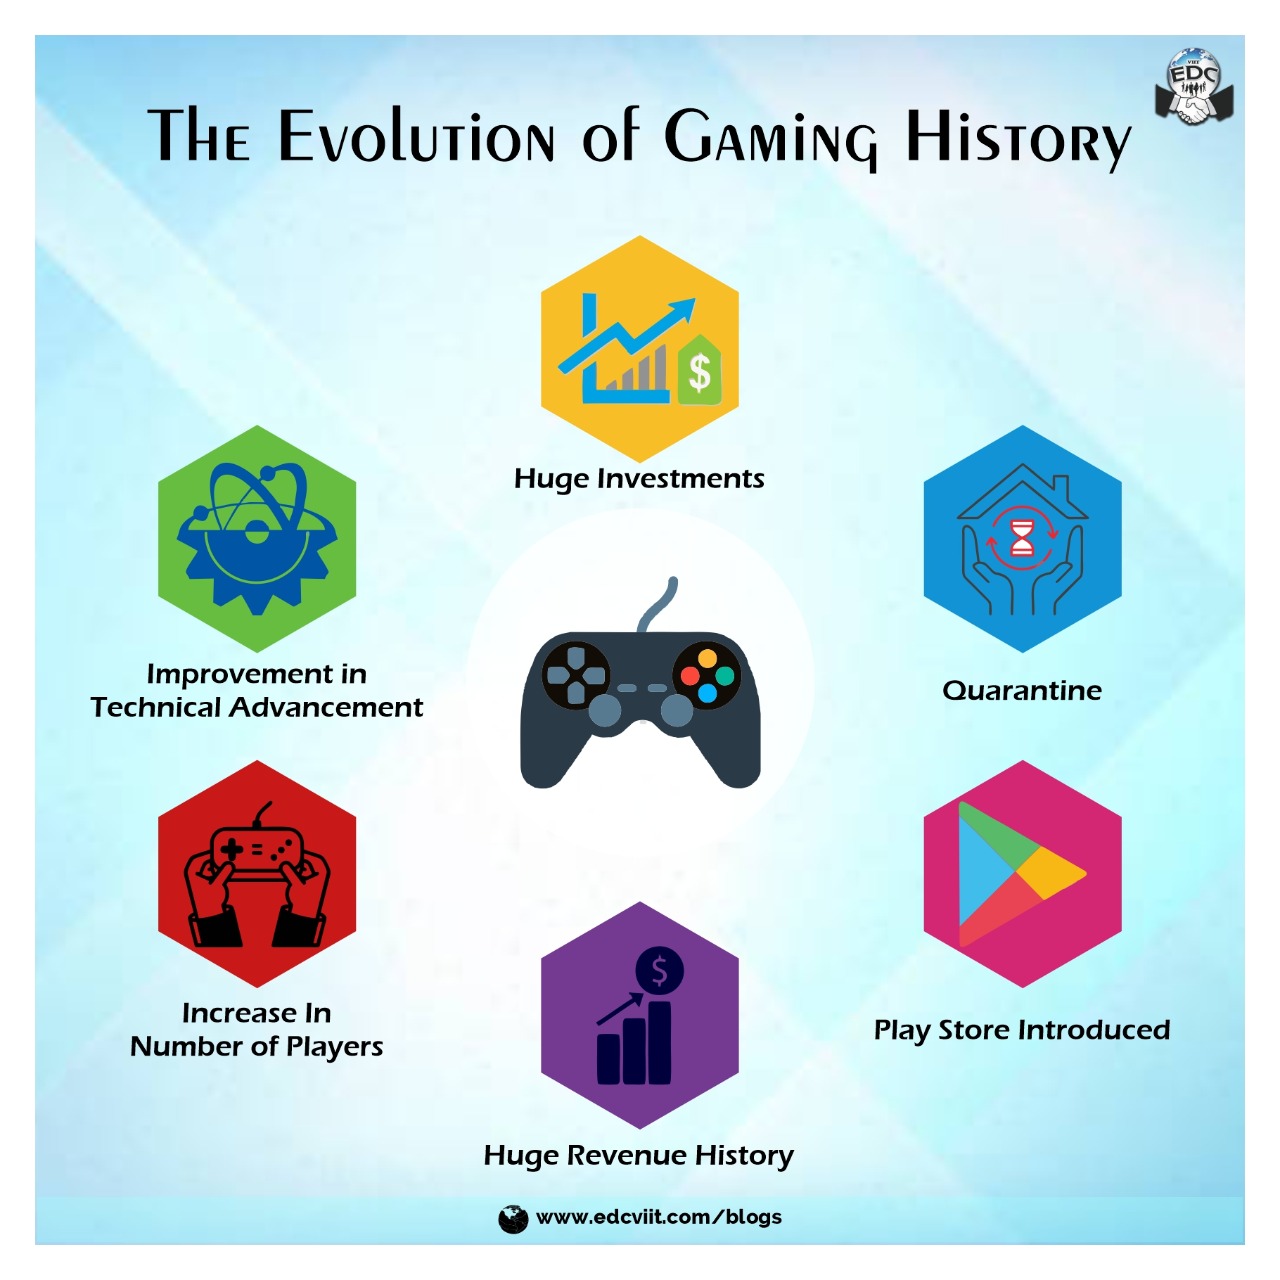 THE EVOLUTION OF GAMING HISTORY